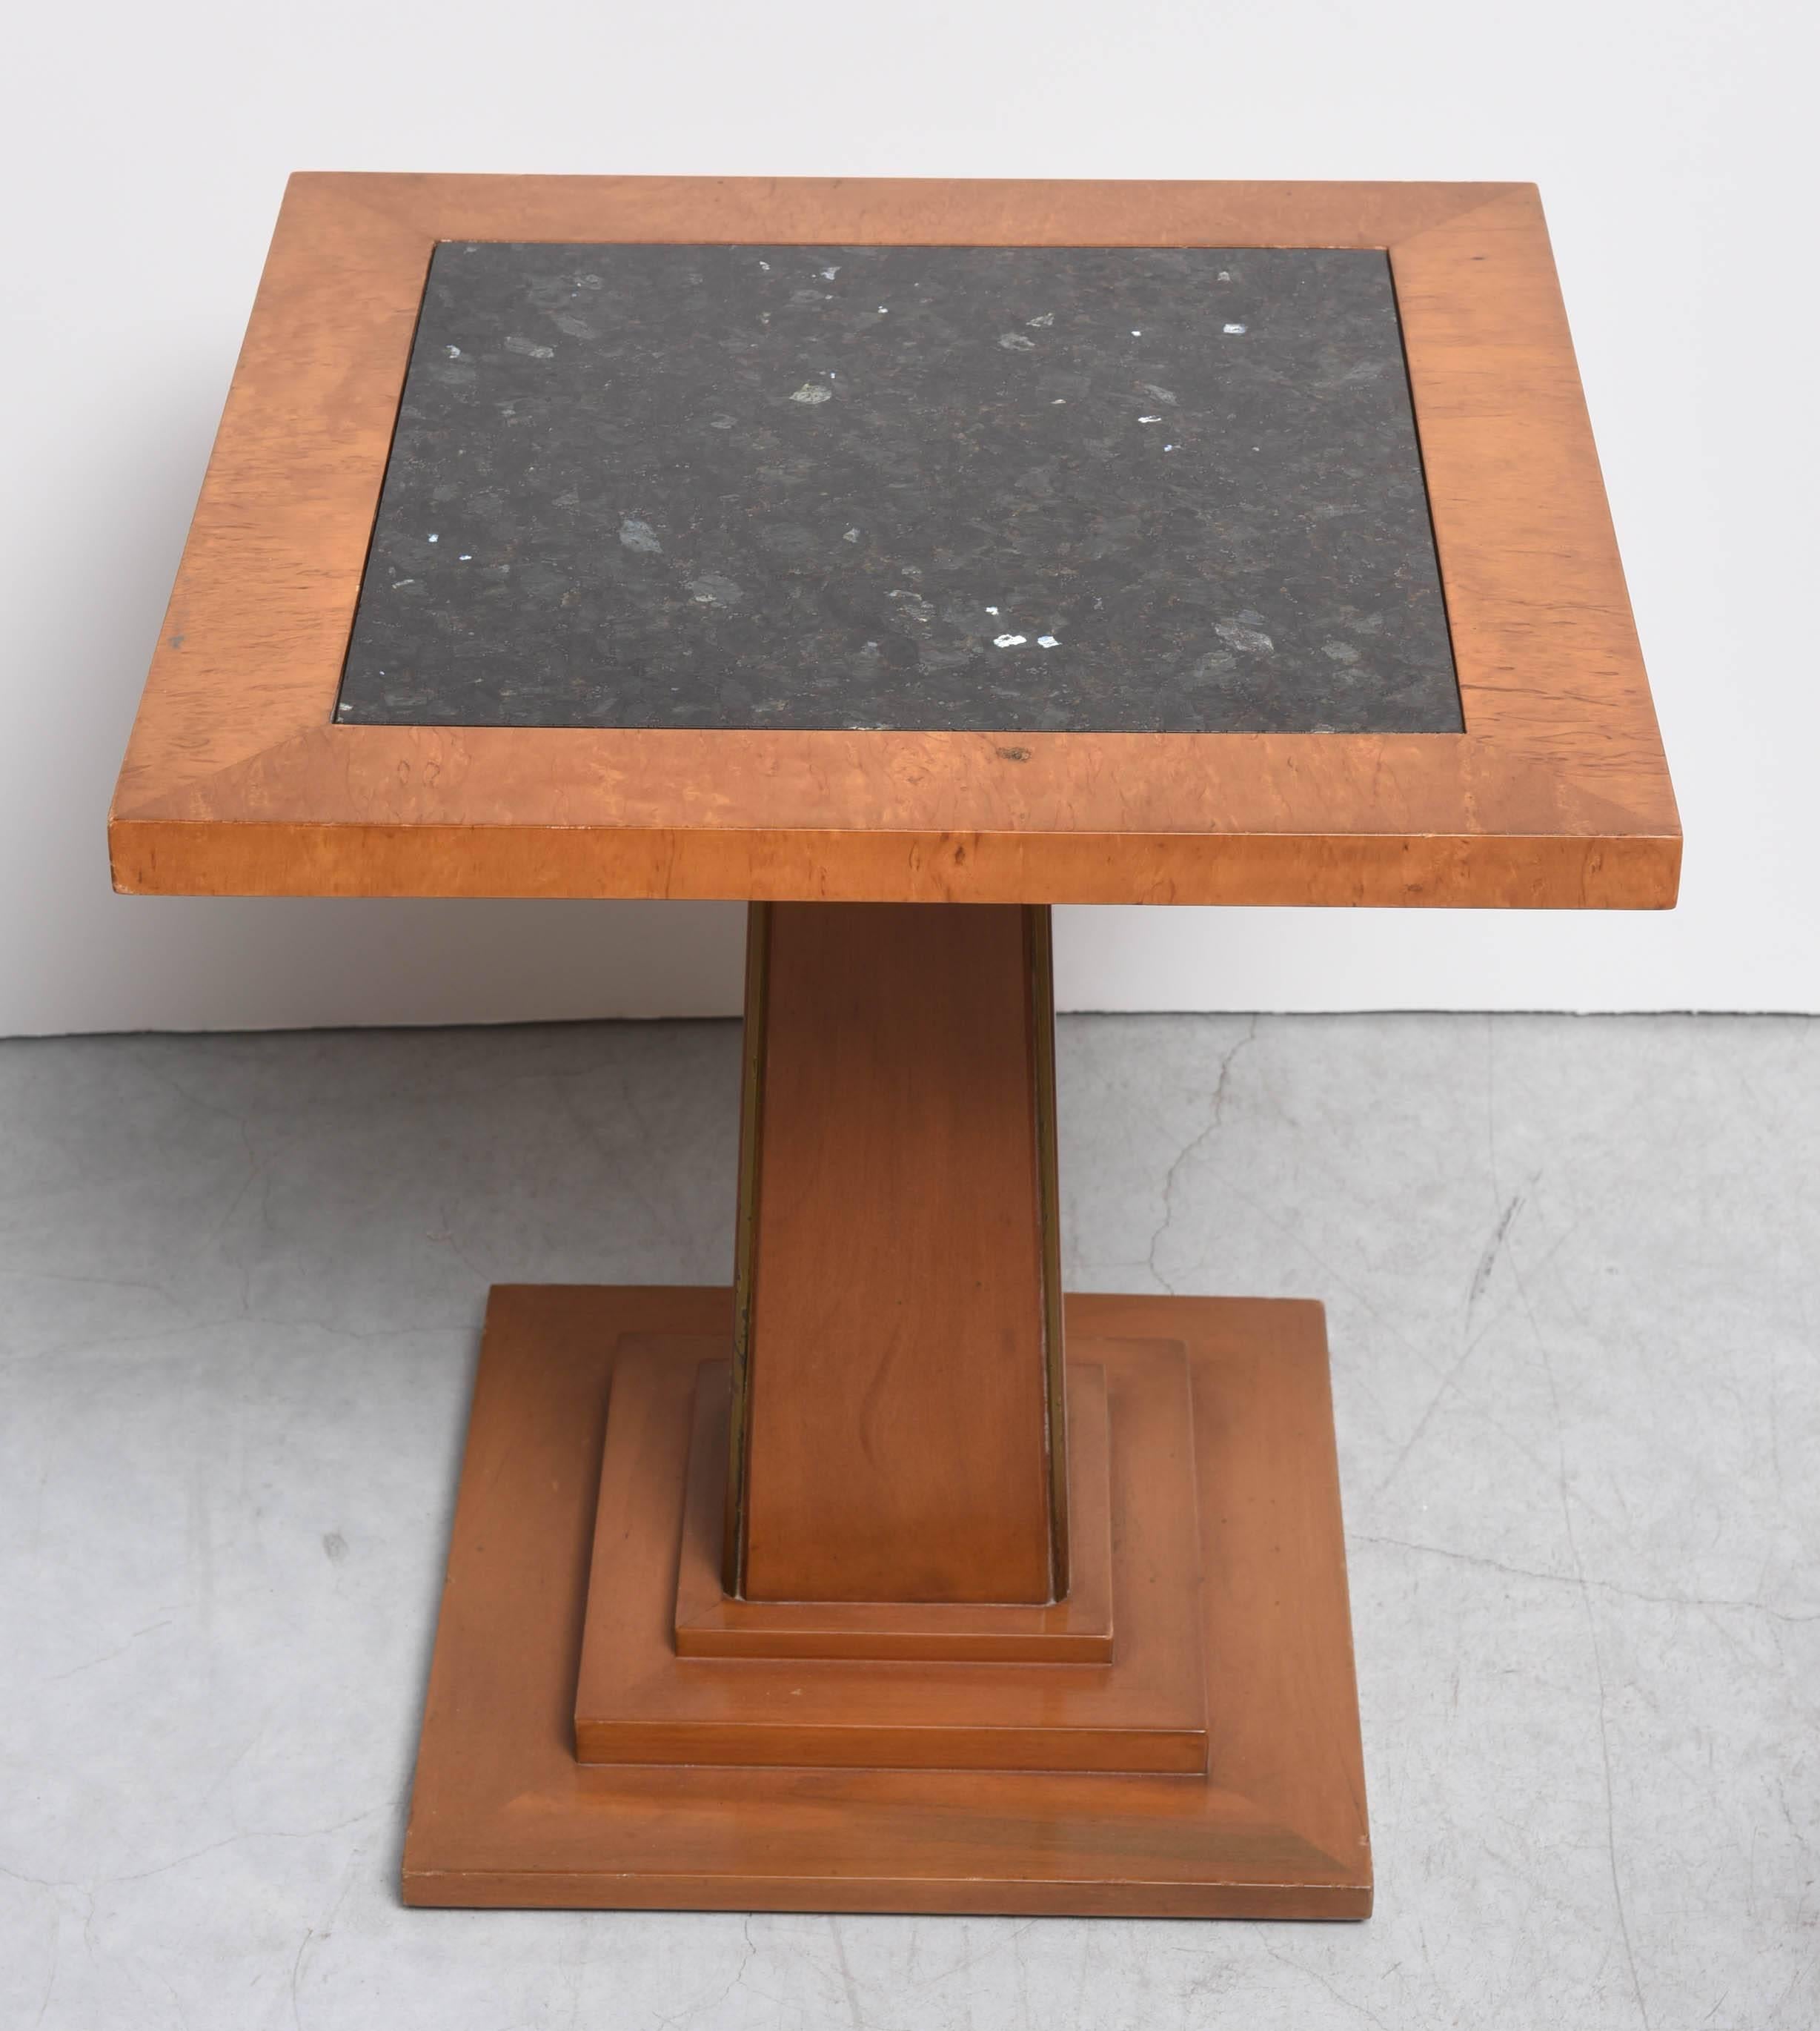 European Deco side tables, the stone tops are inserted